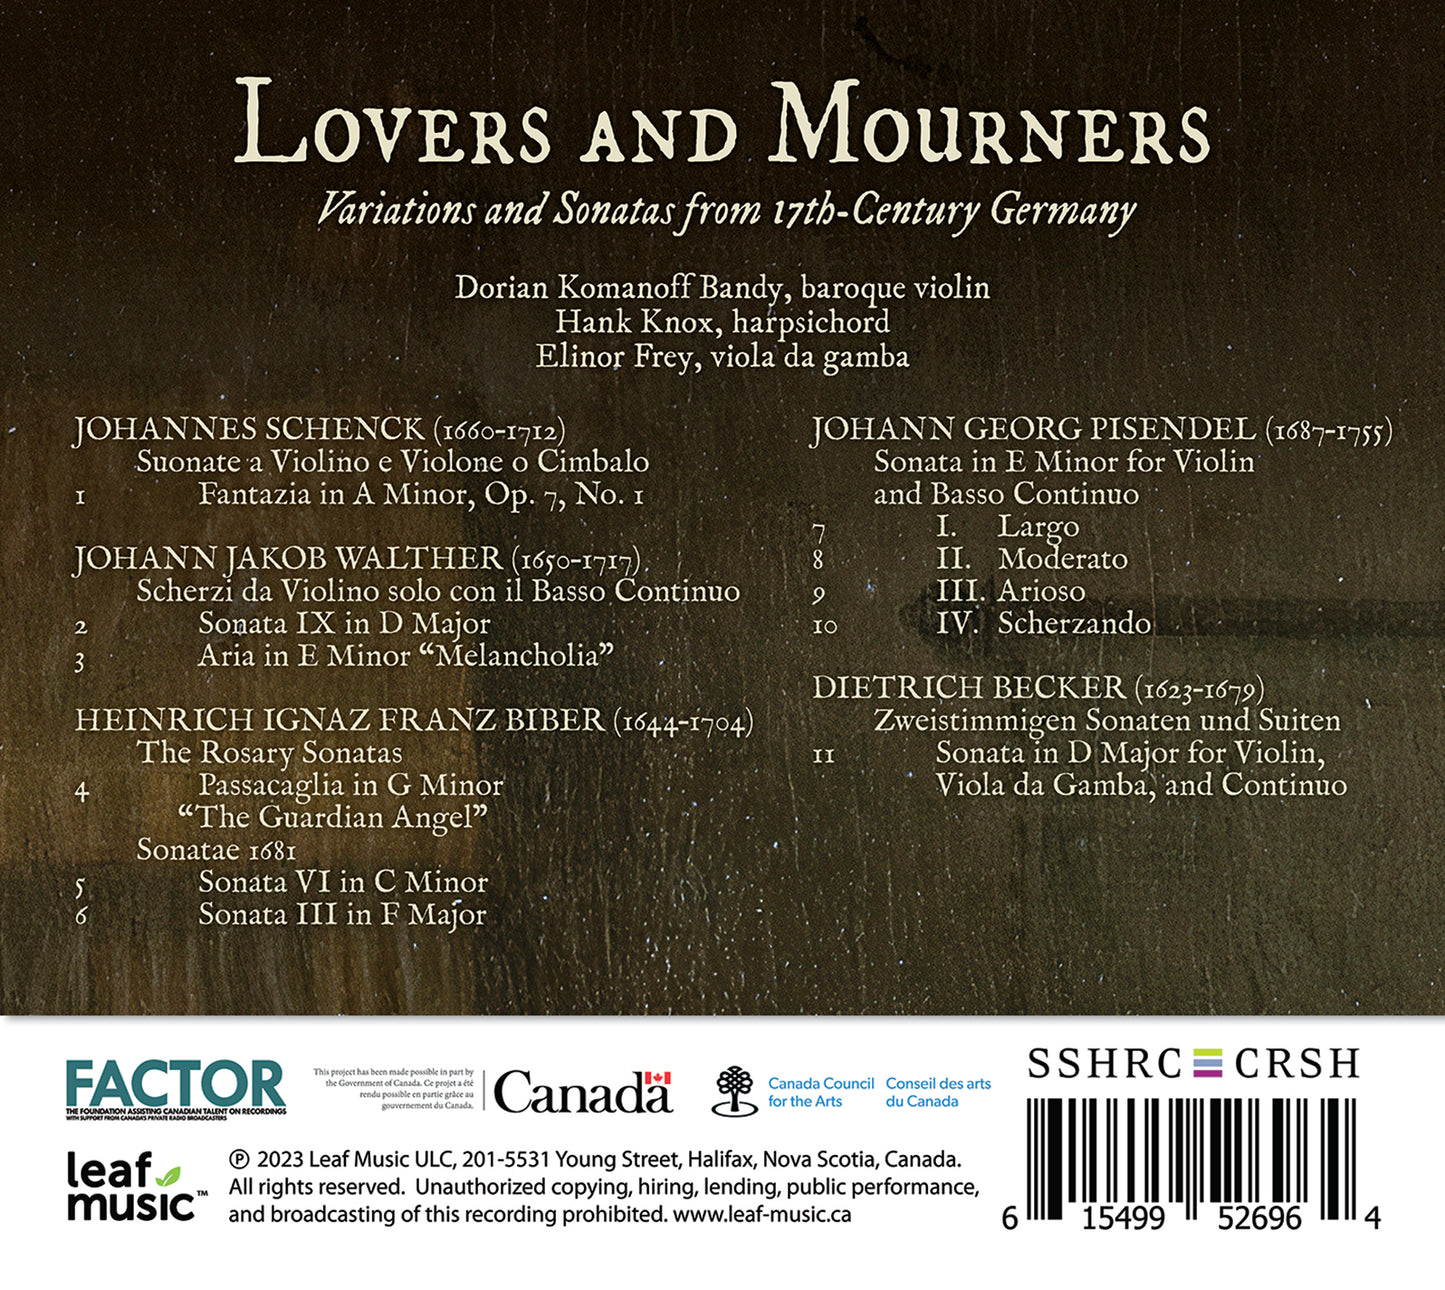 Lovers & Mourners - Variations & Sonatas from 17th Century Germany